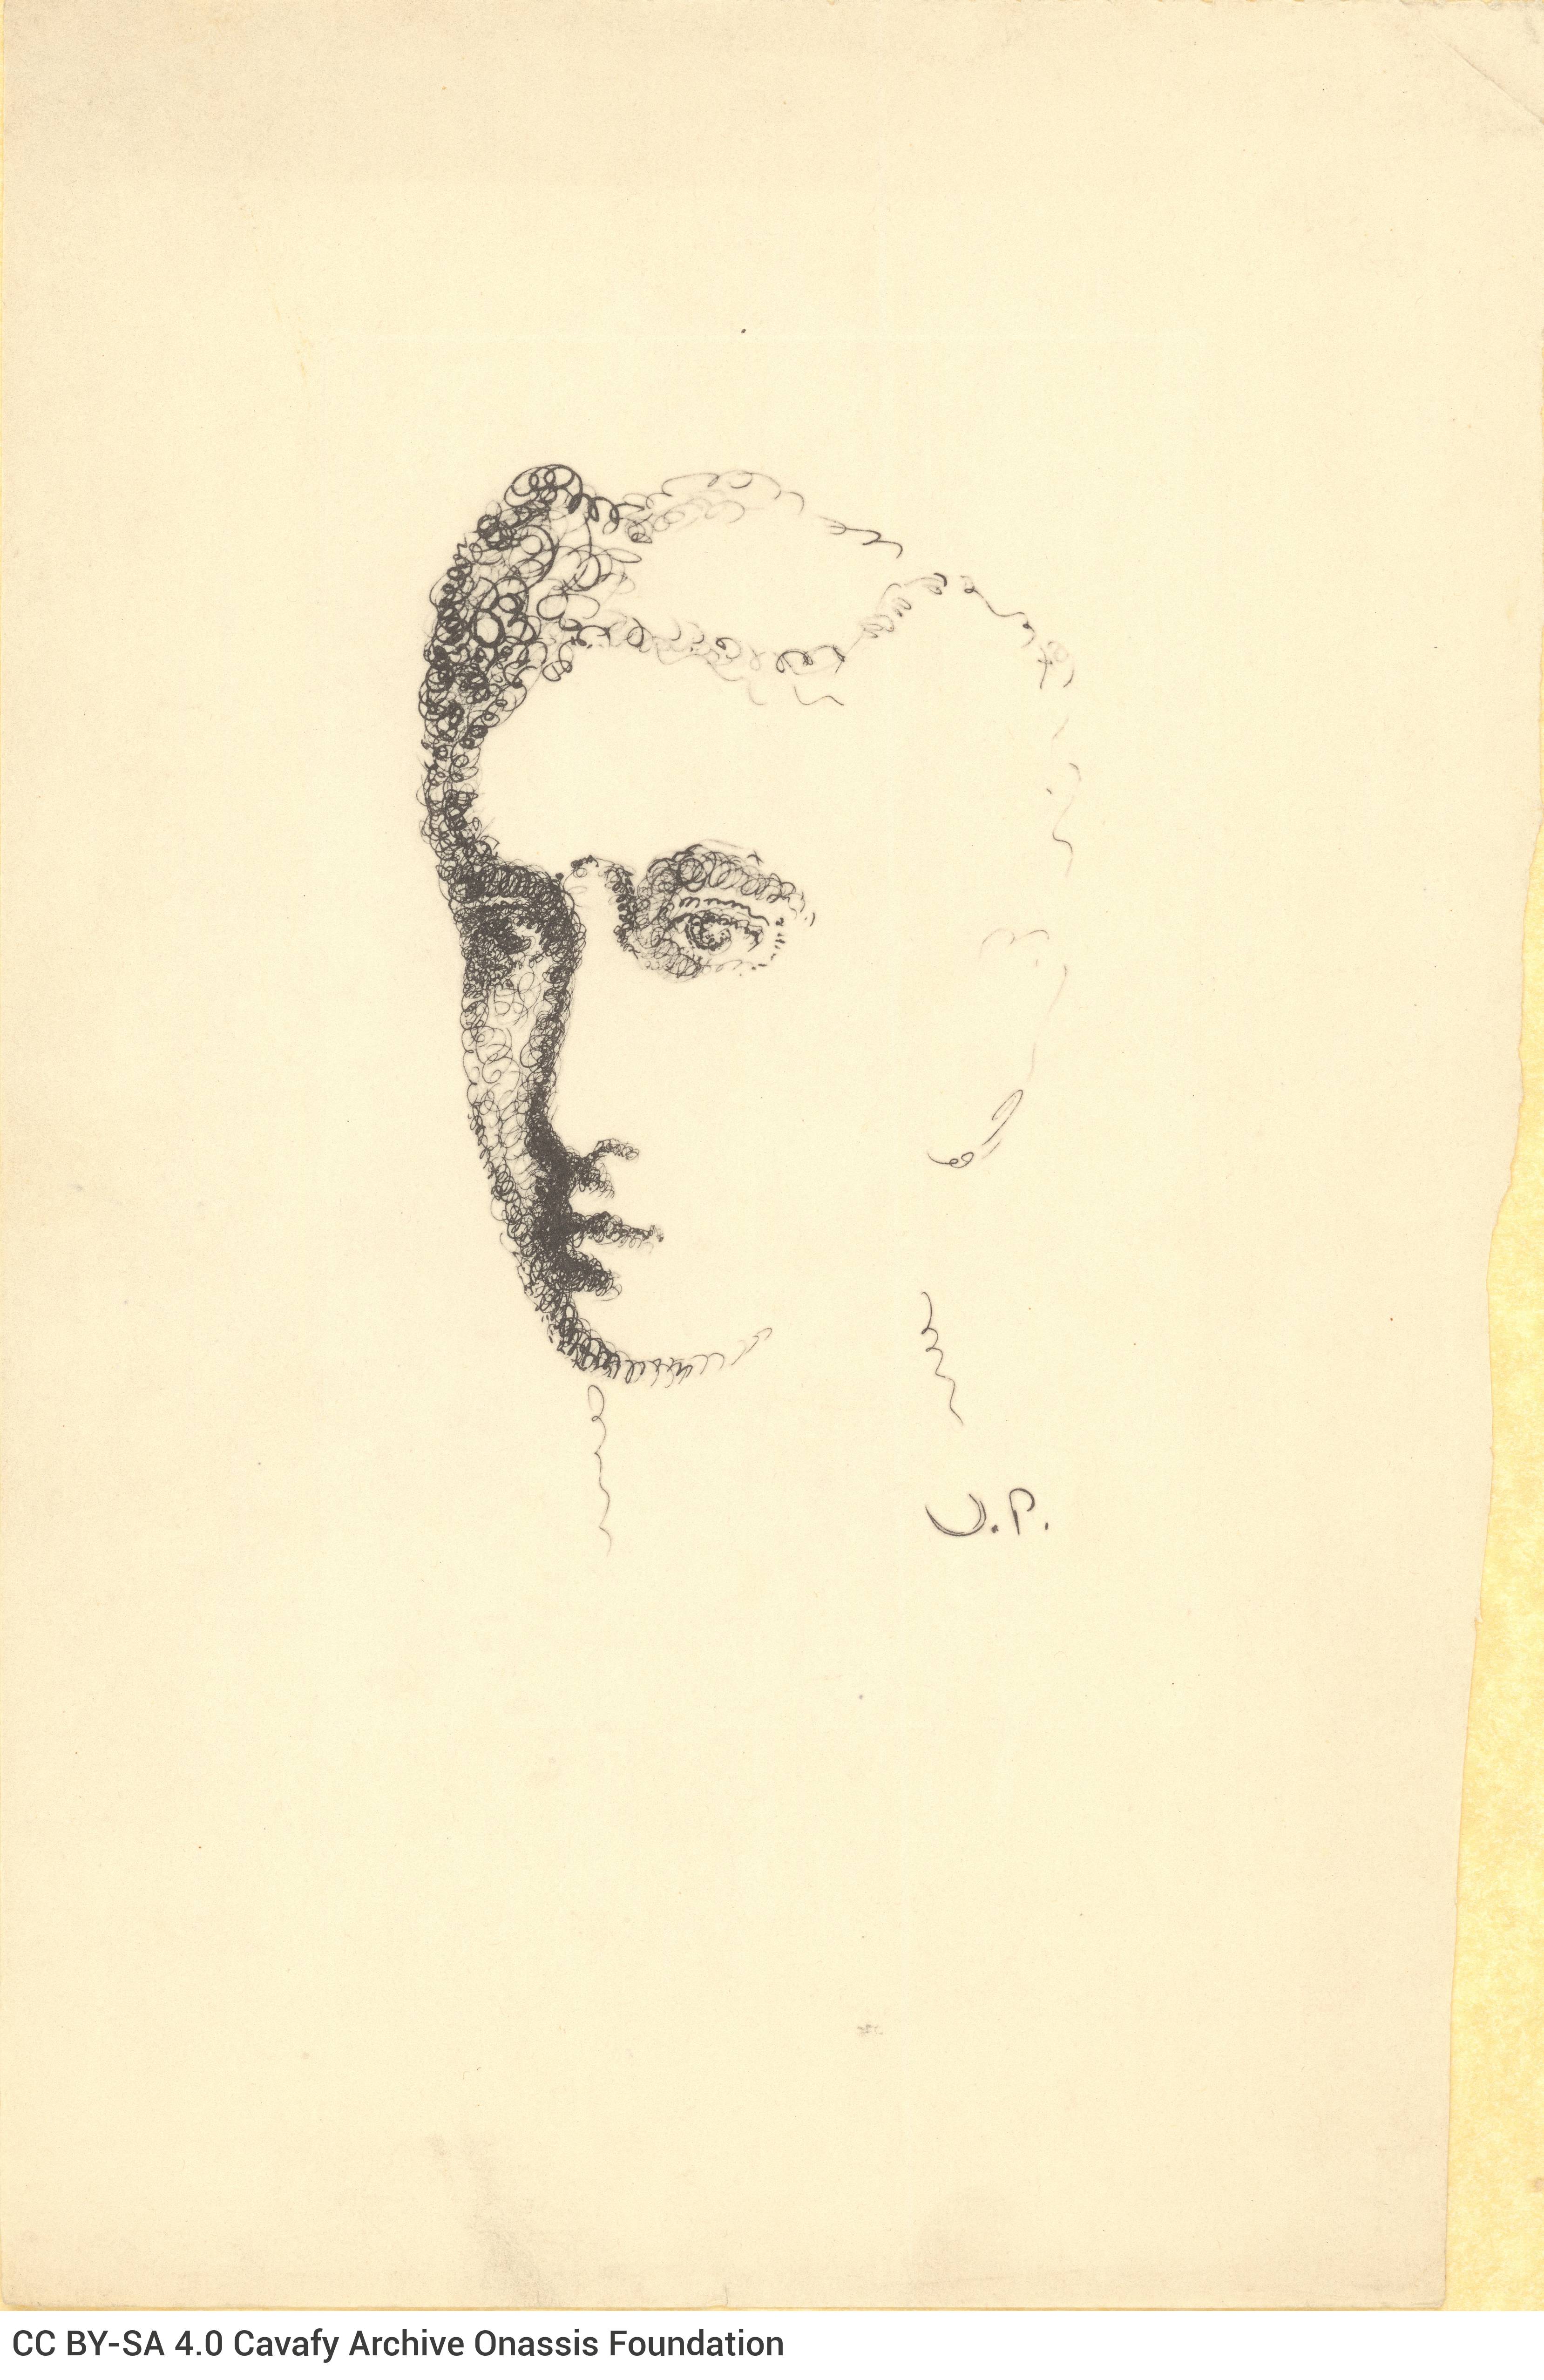 Reproduction (perhaps serigraphy) of a portrait of Cavafy at a young age. The original sketch appears to have been made in Fi